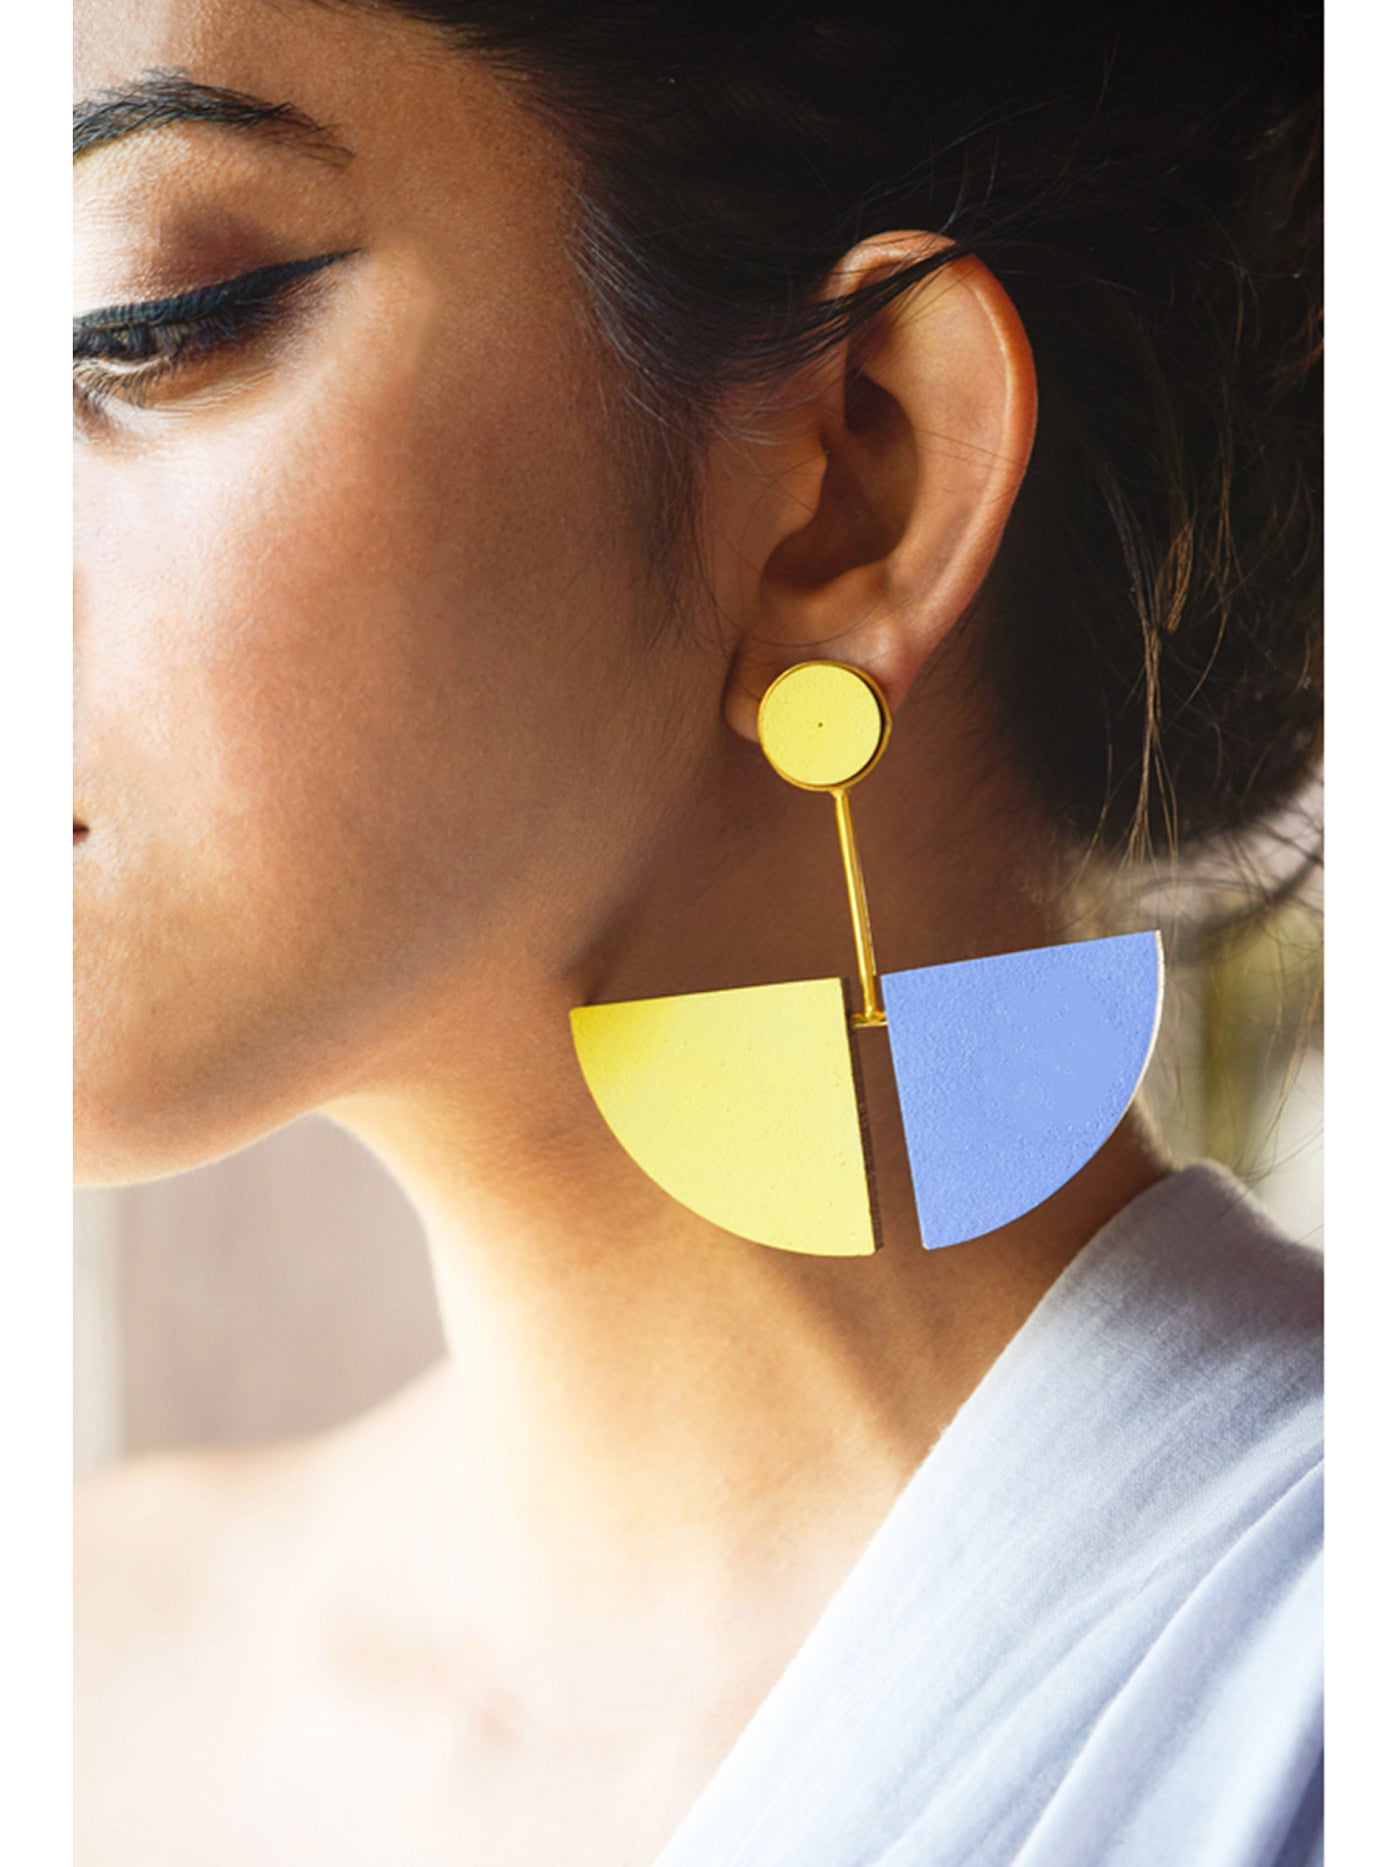 Earrings in Blue and Yellow handcrafted using reclaimed teak wood and gold plated brass.